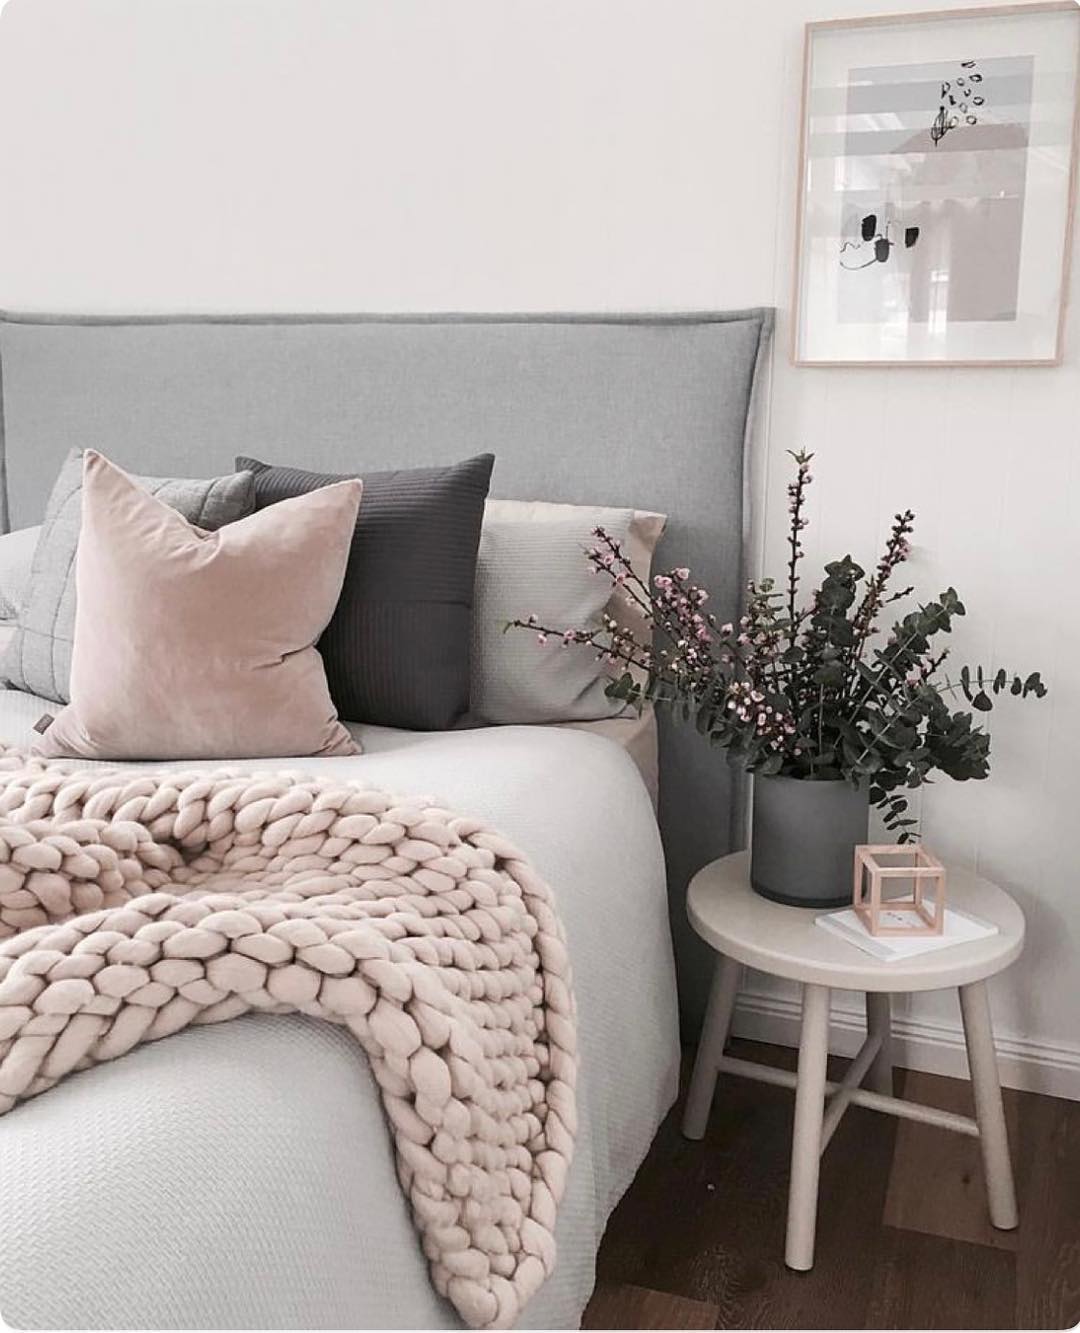 Cozy feng shui bedroom. Photo by Instagram user @ashleypeacock